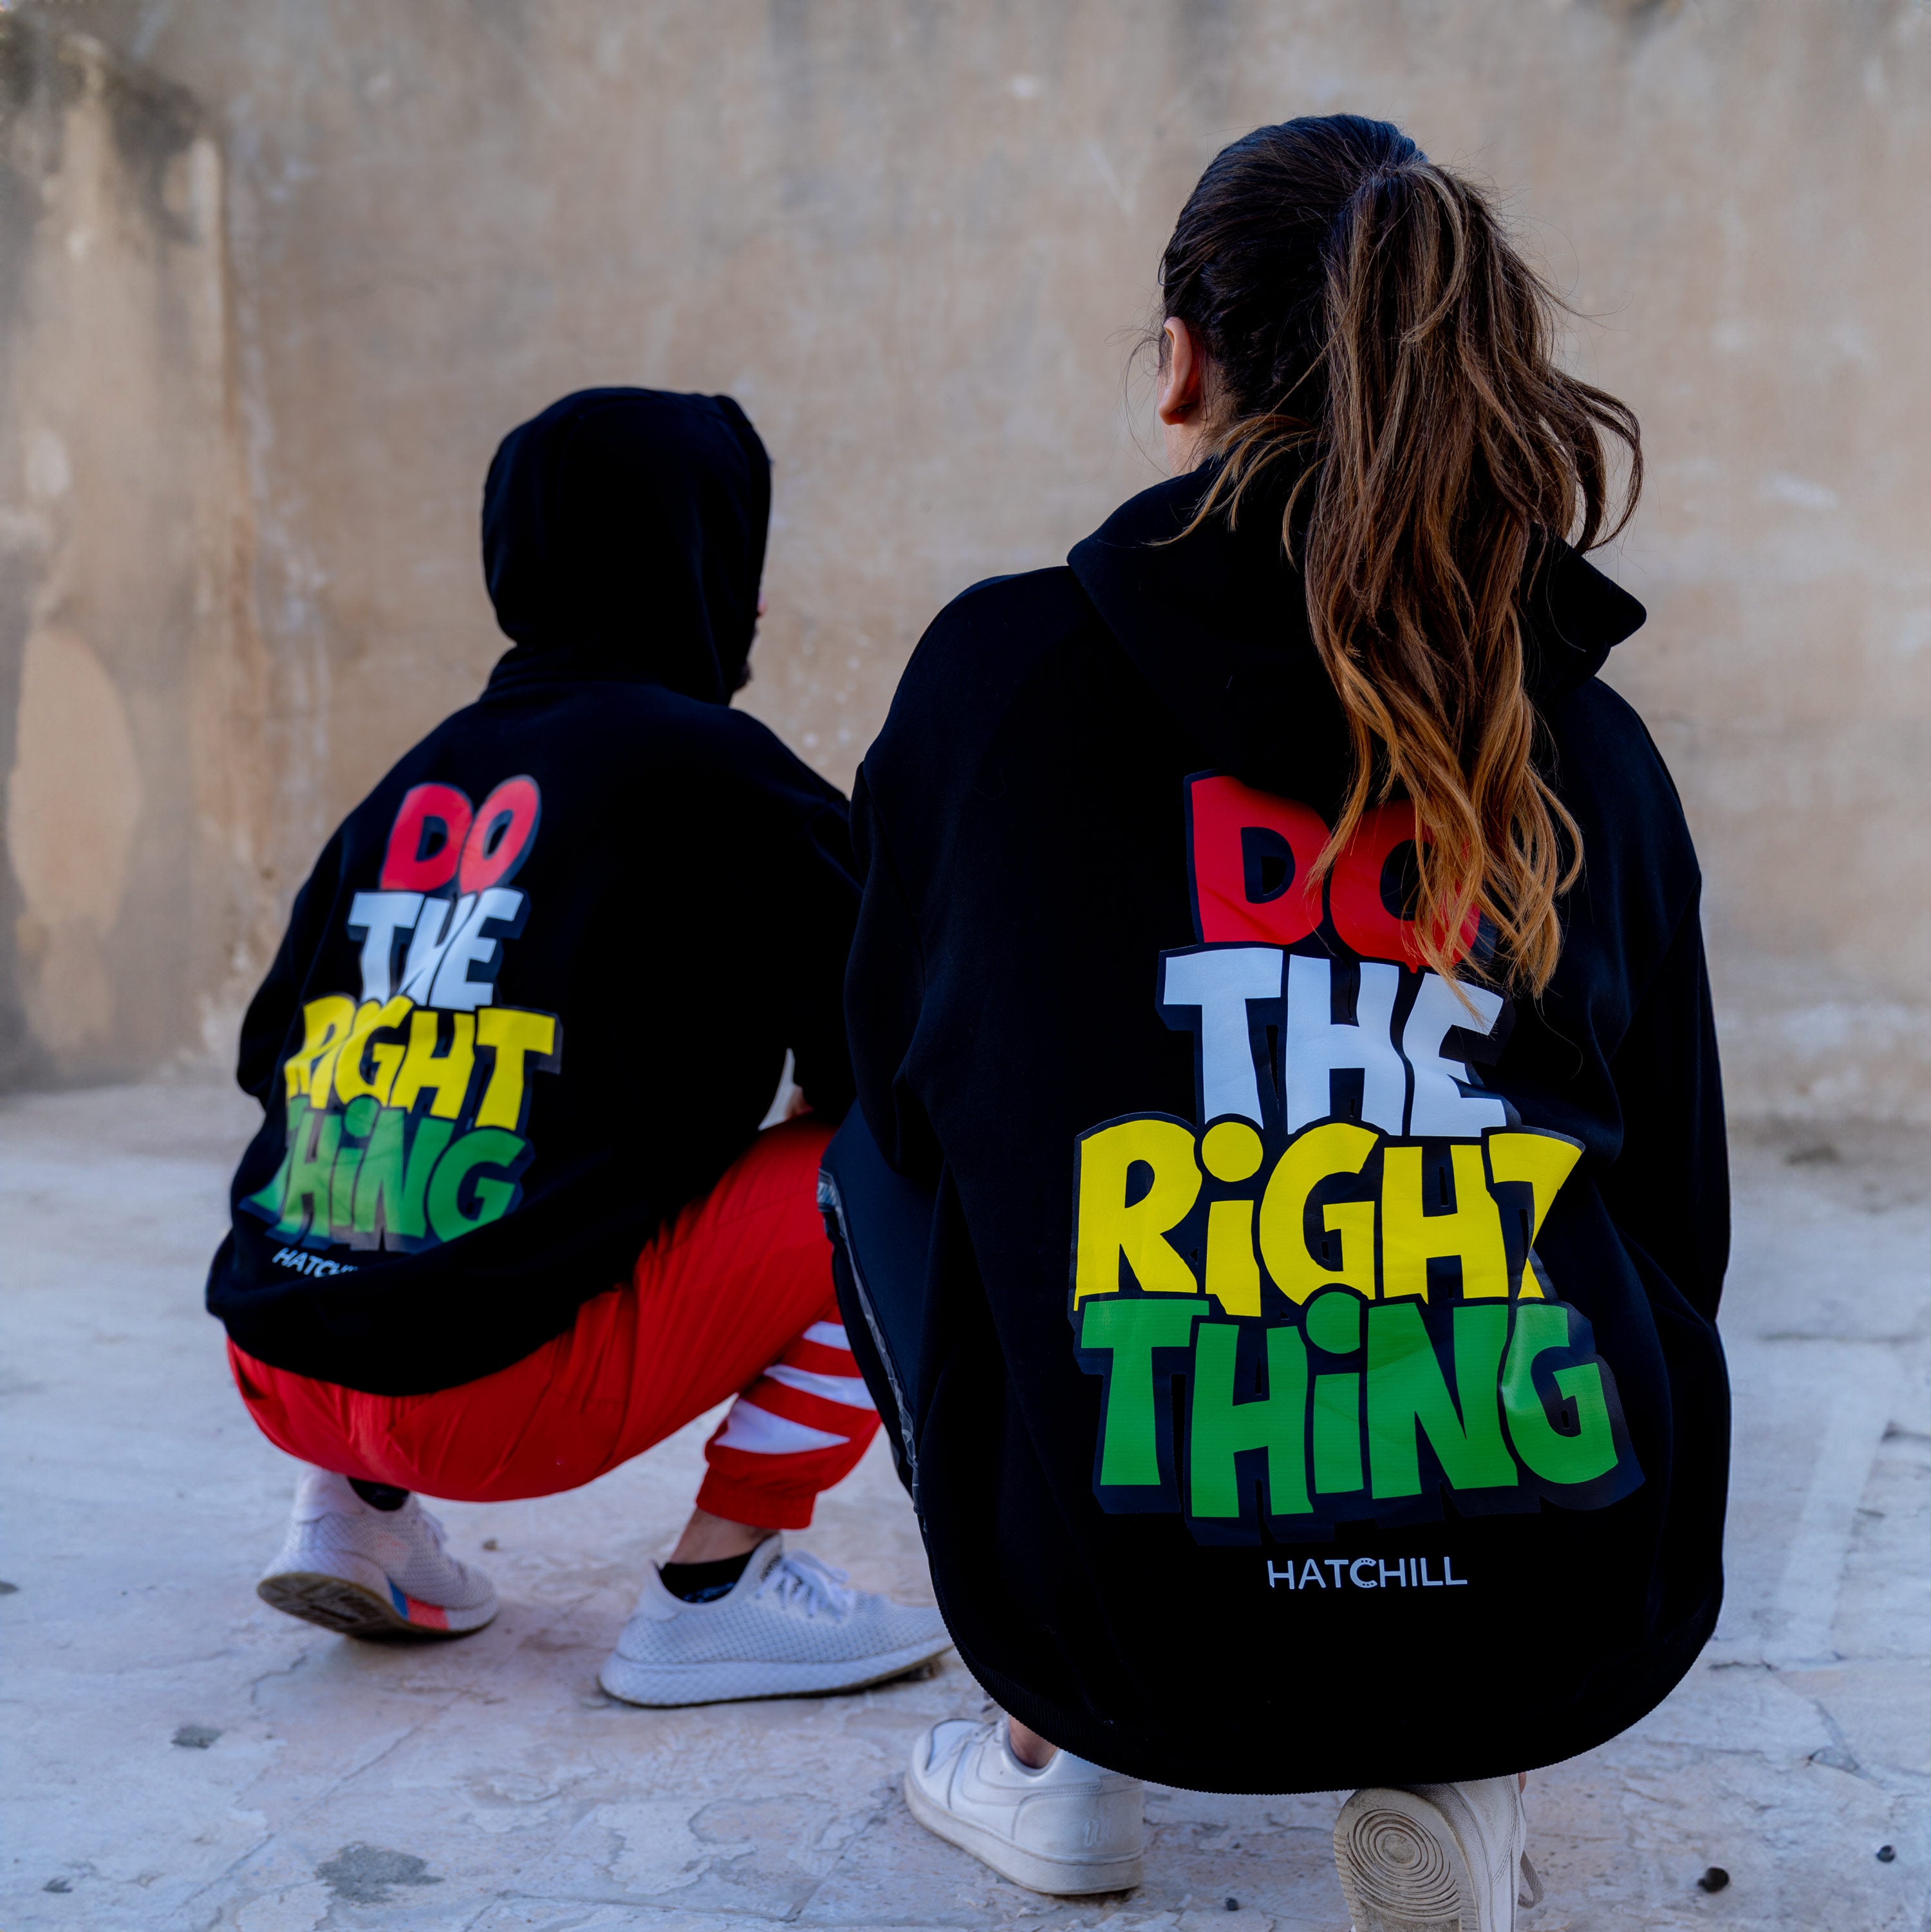 Do the right thing Hoodie